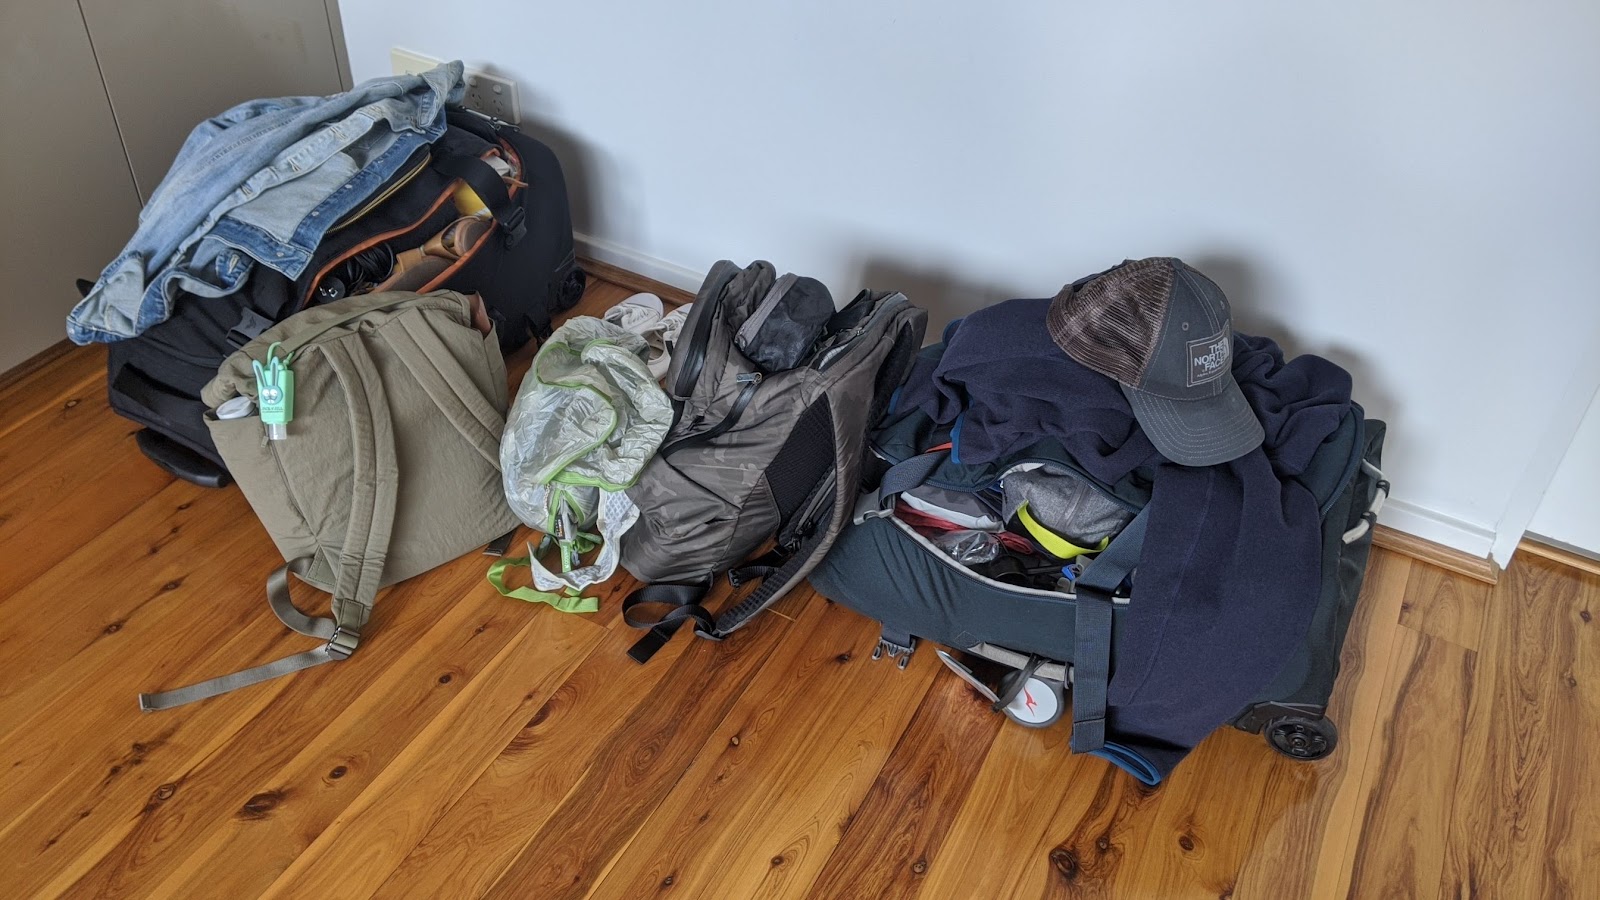 Life in a backpack. Are we meant to be nomadic?